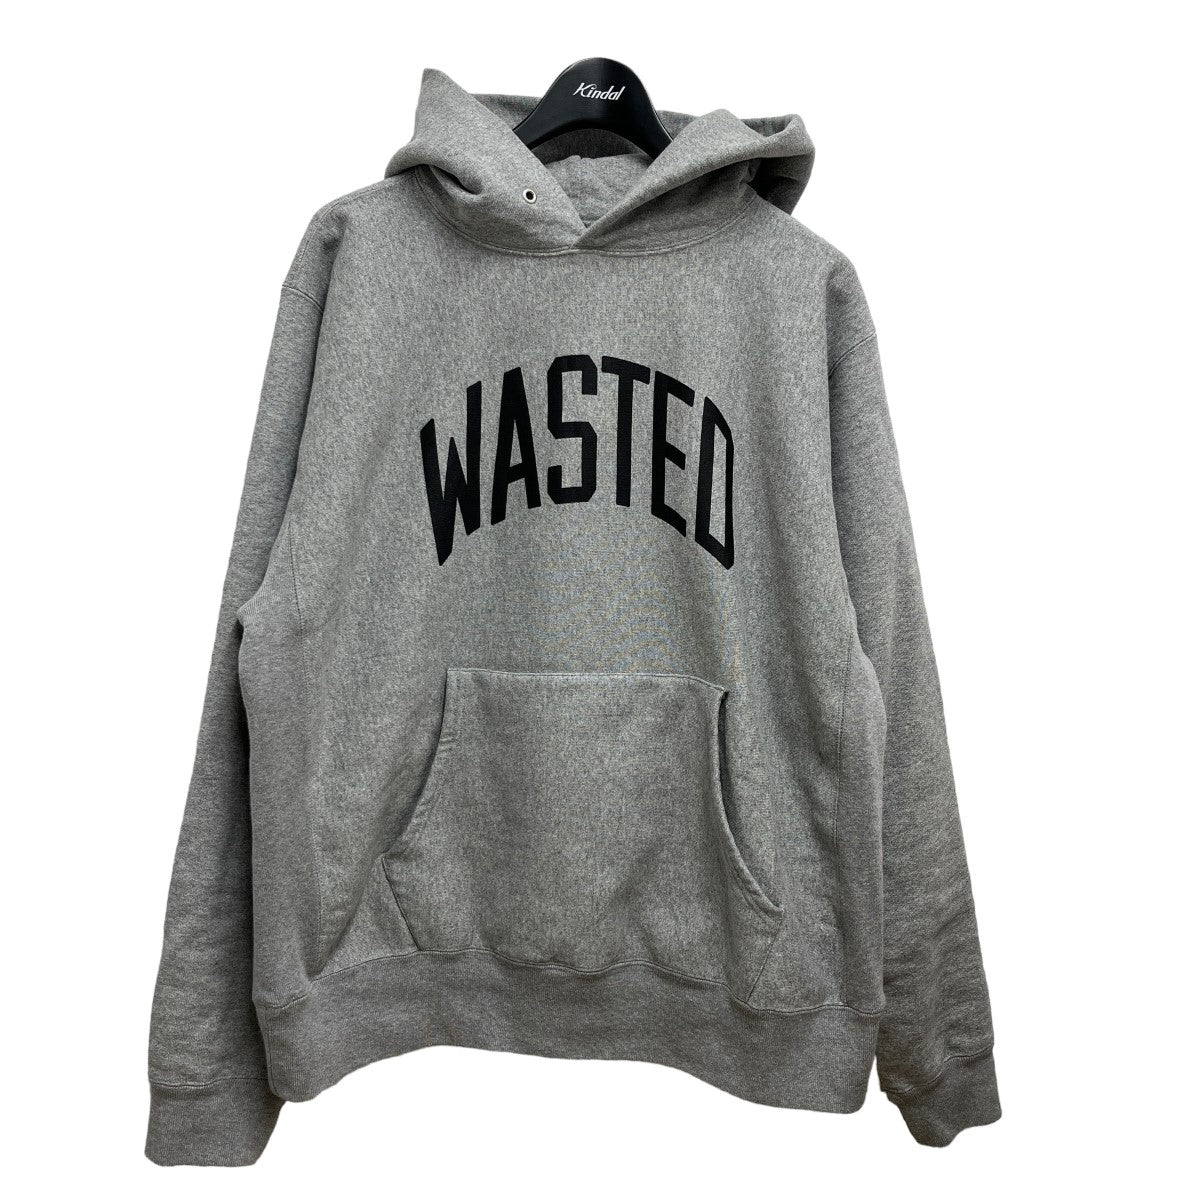 Wasted Youth HEAVY WEIGHT HOODIE▪️新品未使用